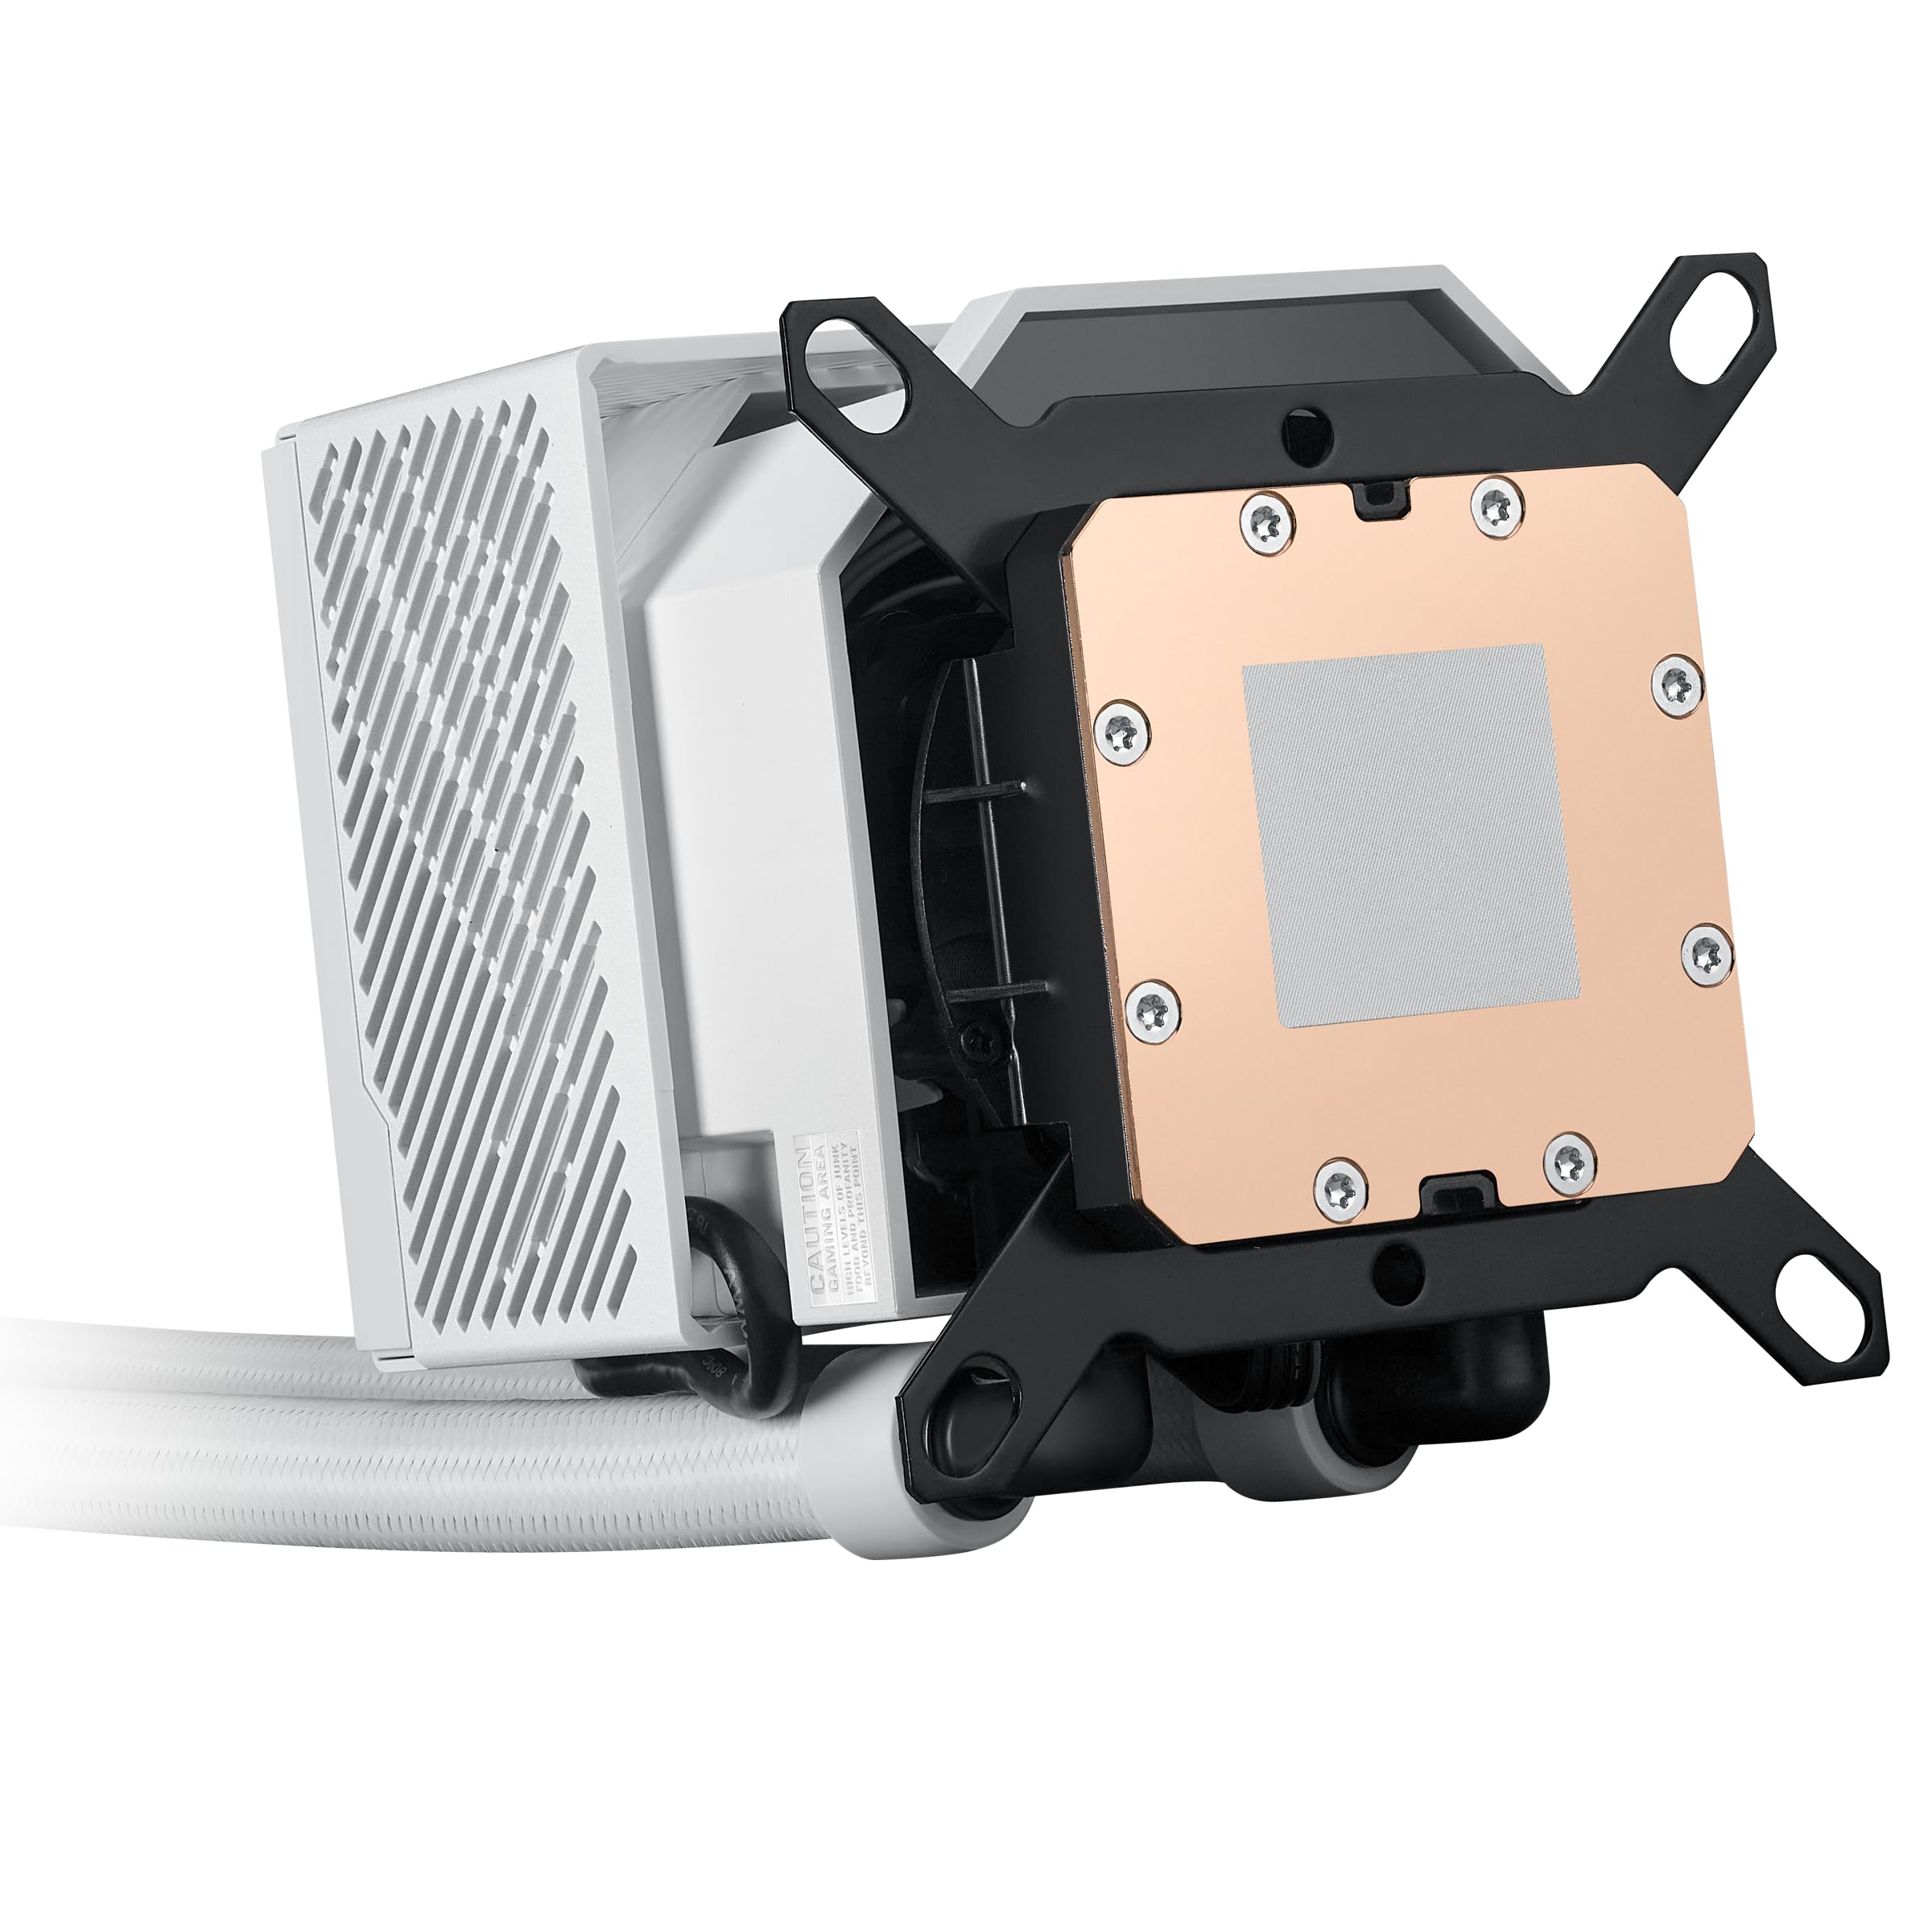 ASUS ROG Ryujin III 360 ARGB WHT All-in-one Liquid CPU Cooler with 360mm Radiator. Asetek 8th gen Pump, 3X Magnetic 120mm ARGB Fans (Daisy Chain Design), 3.5” LCD Display, White